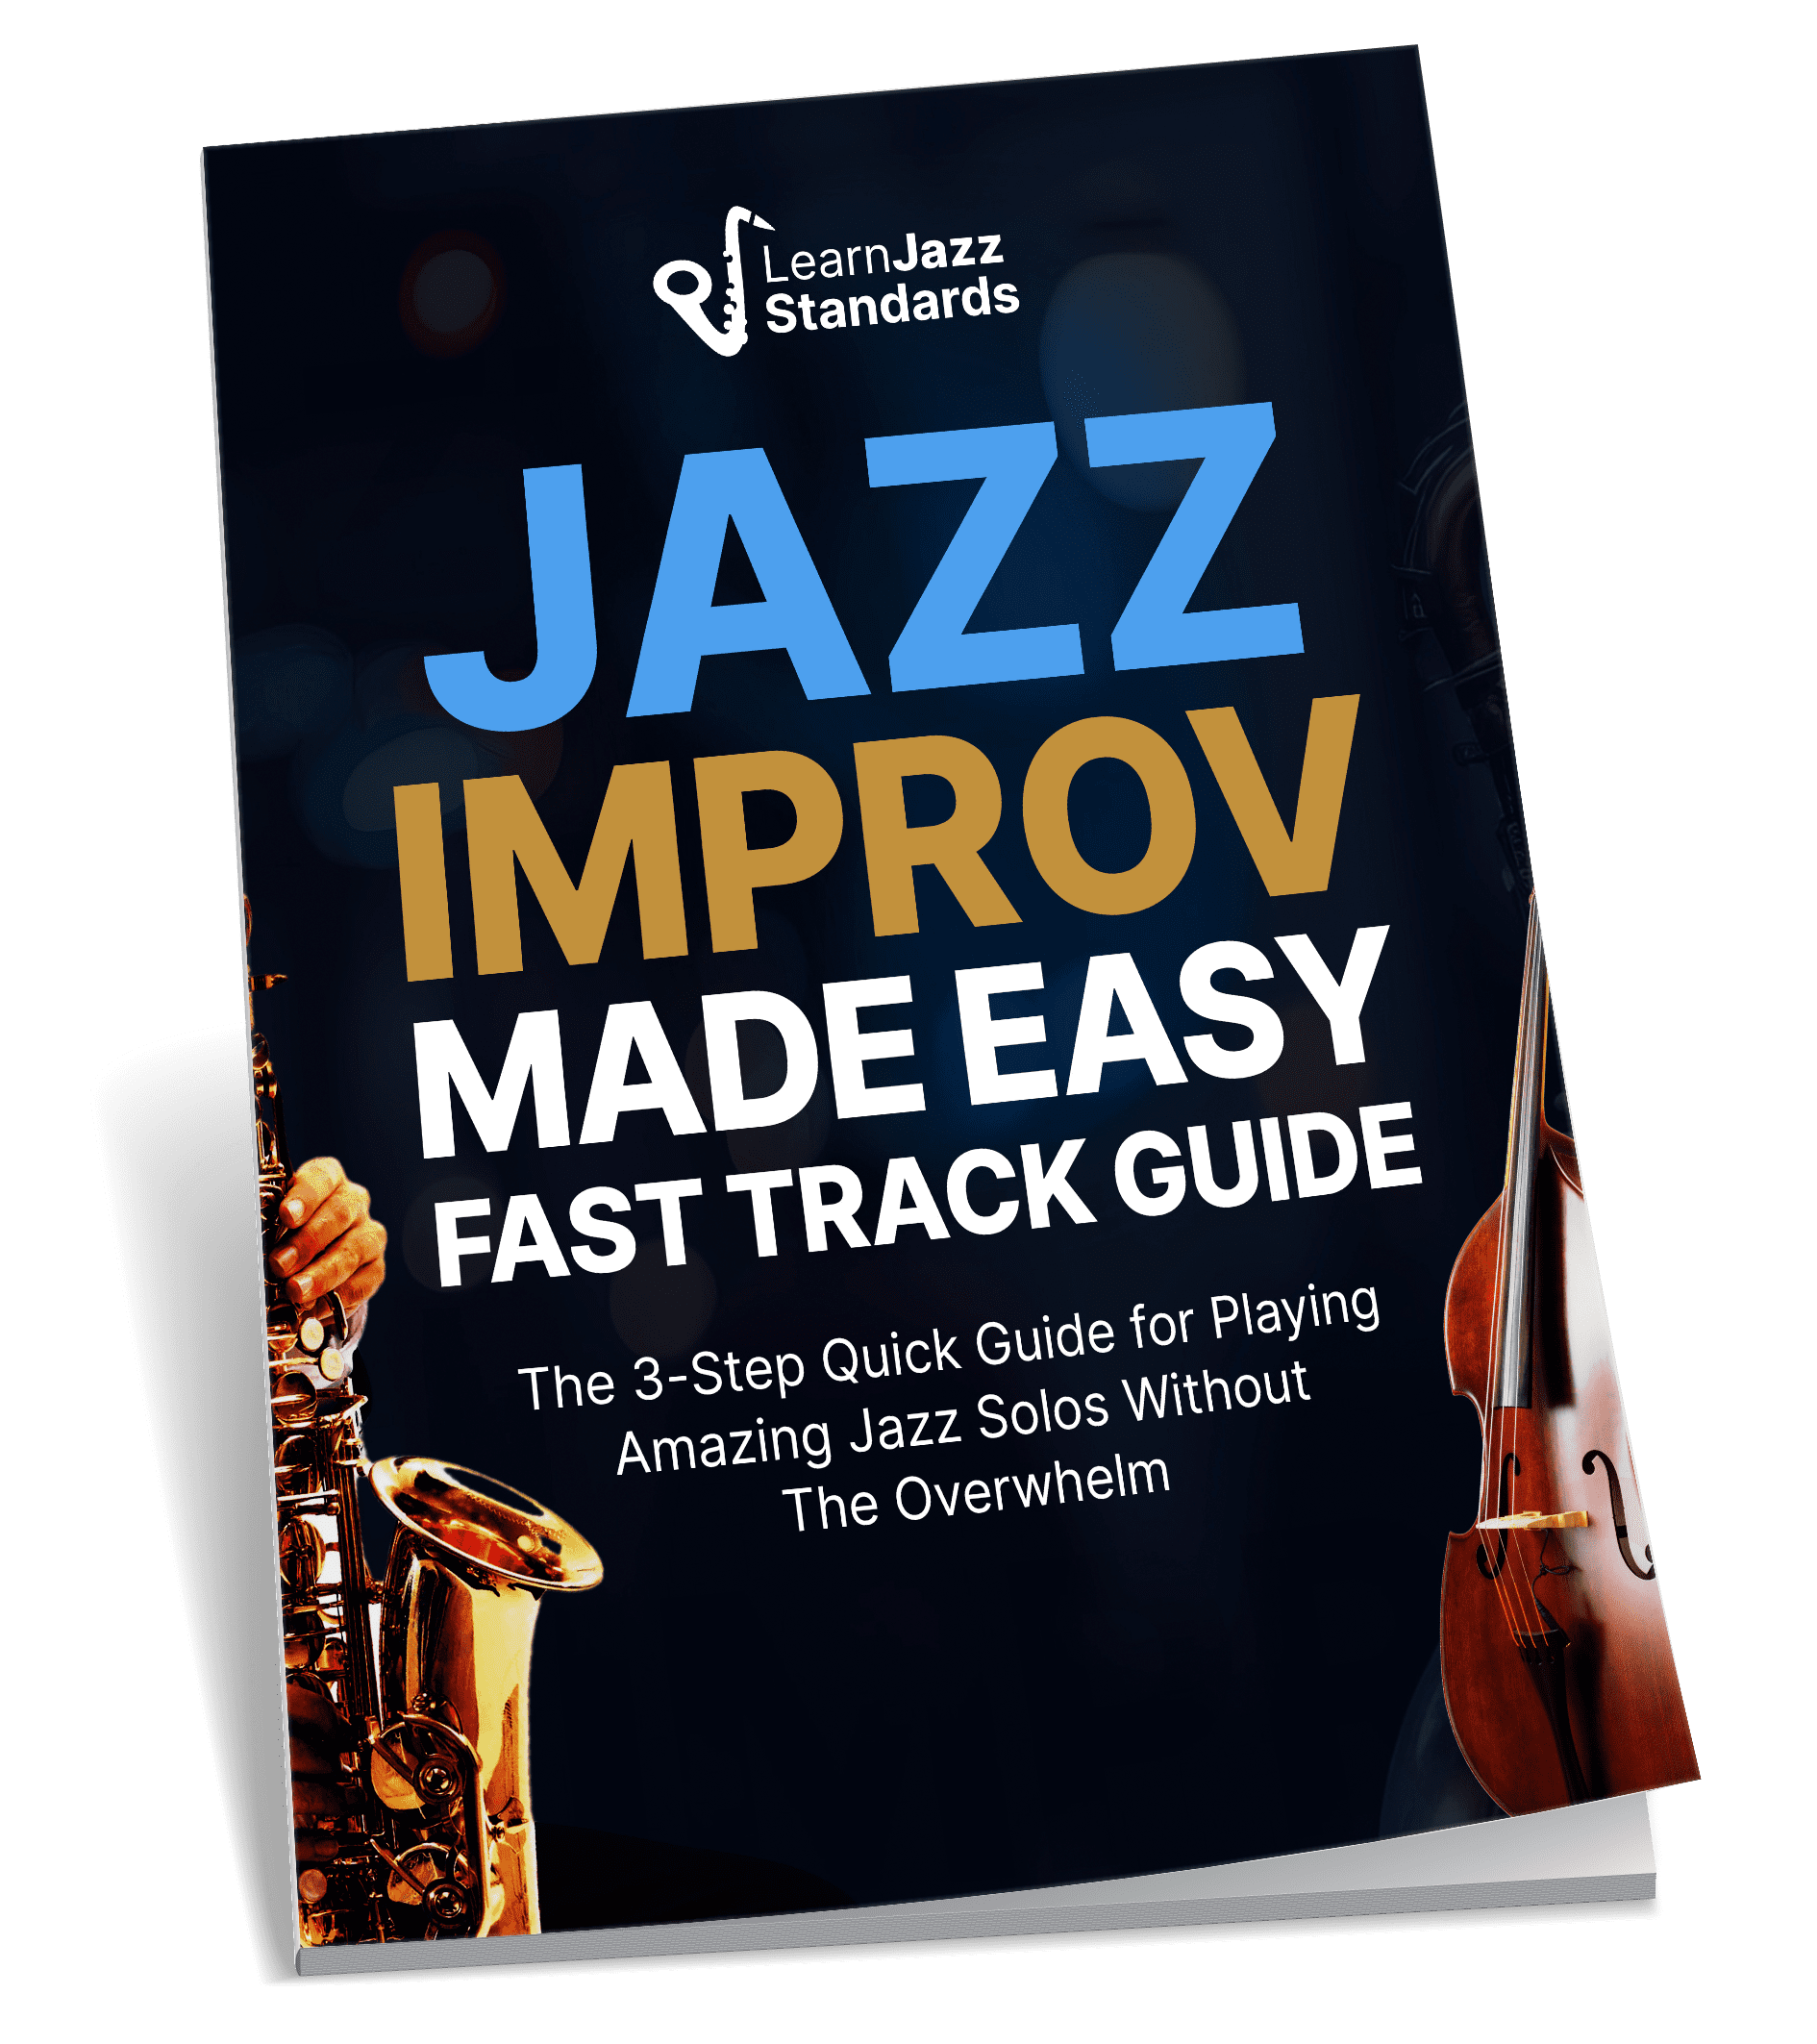 Jazz Improv Made Easy Fast Track Guide Ebook Cover